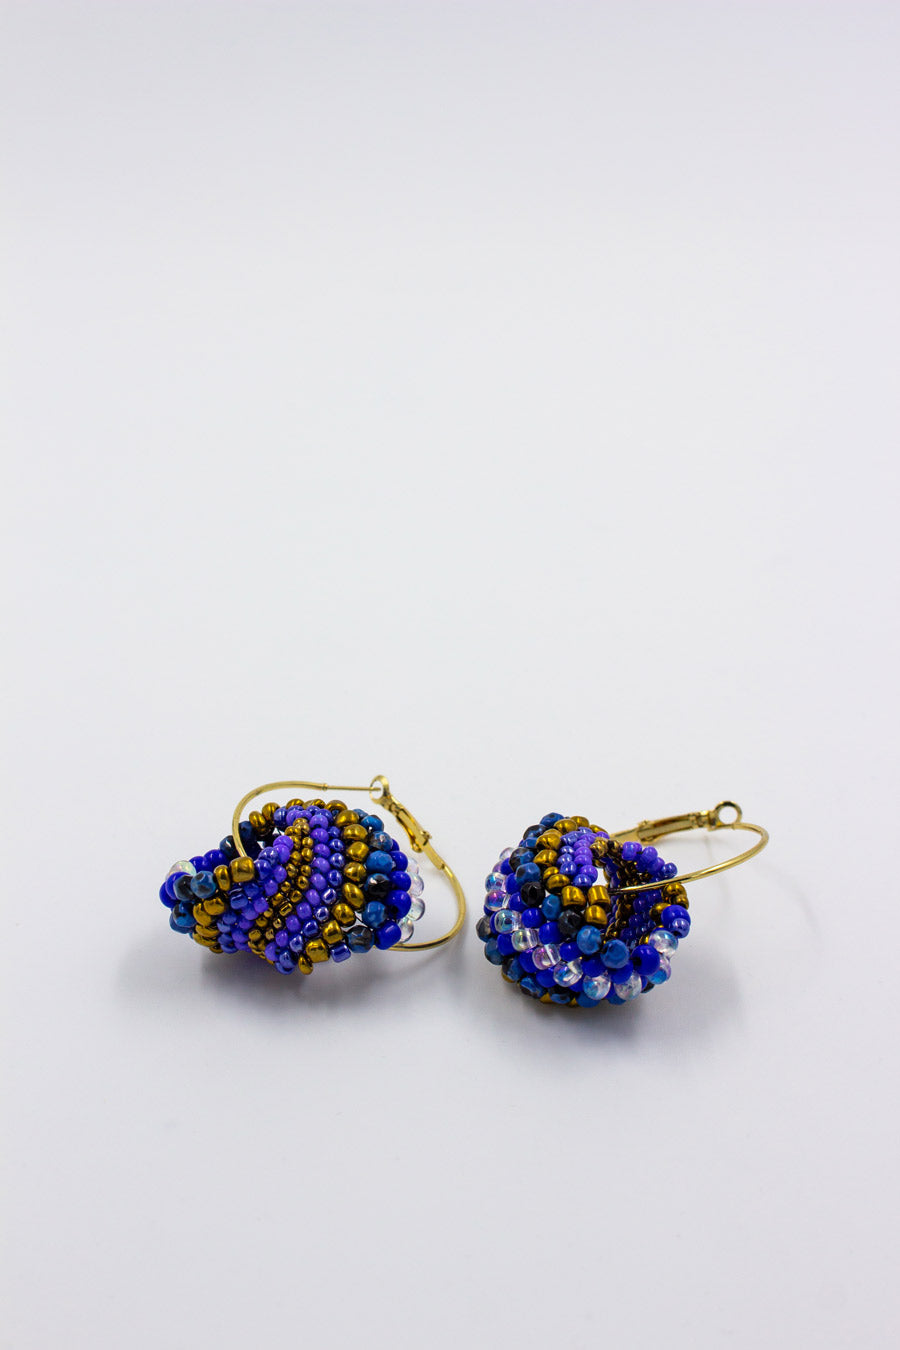 LARGE KNITTED BLUE HOOPS